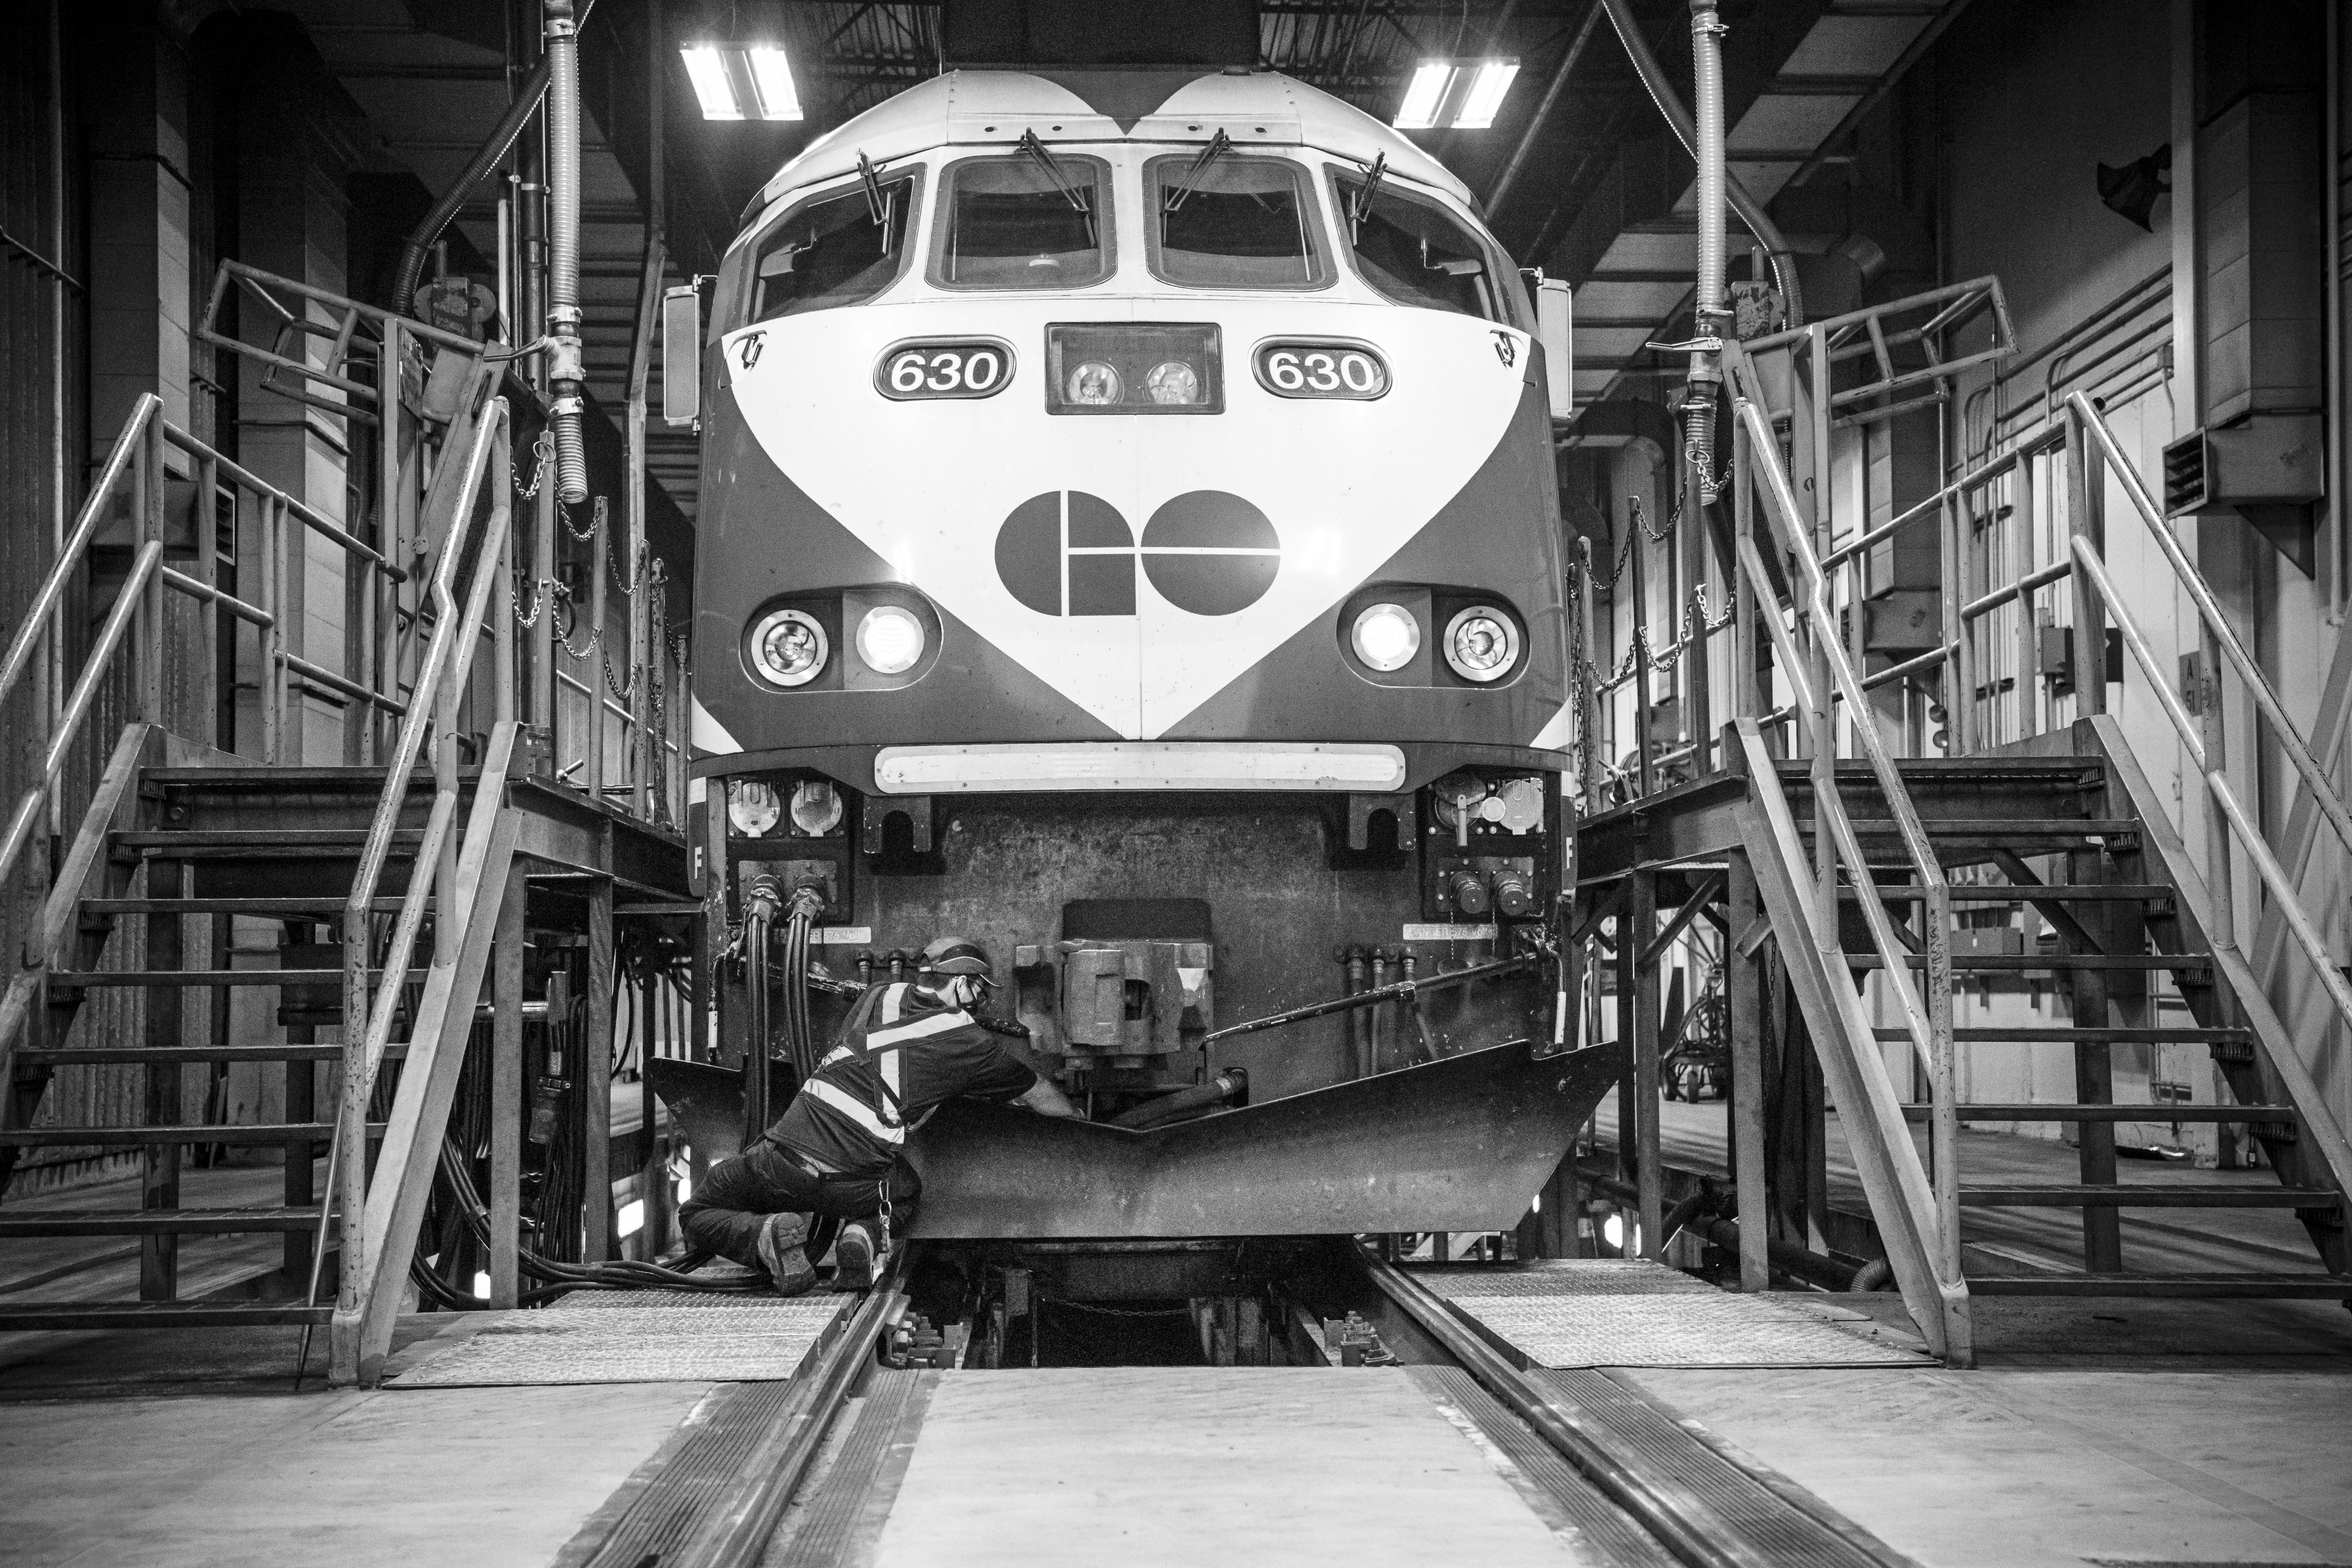 A man works on the front of a train.